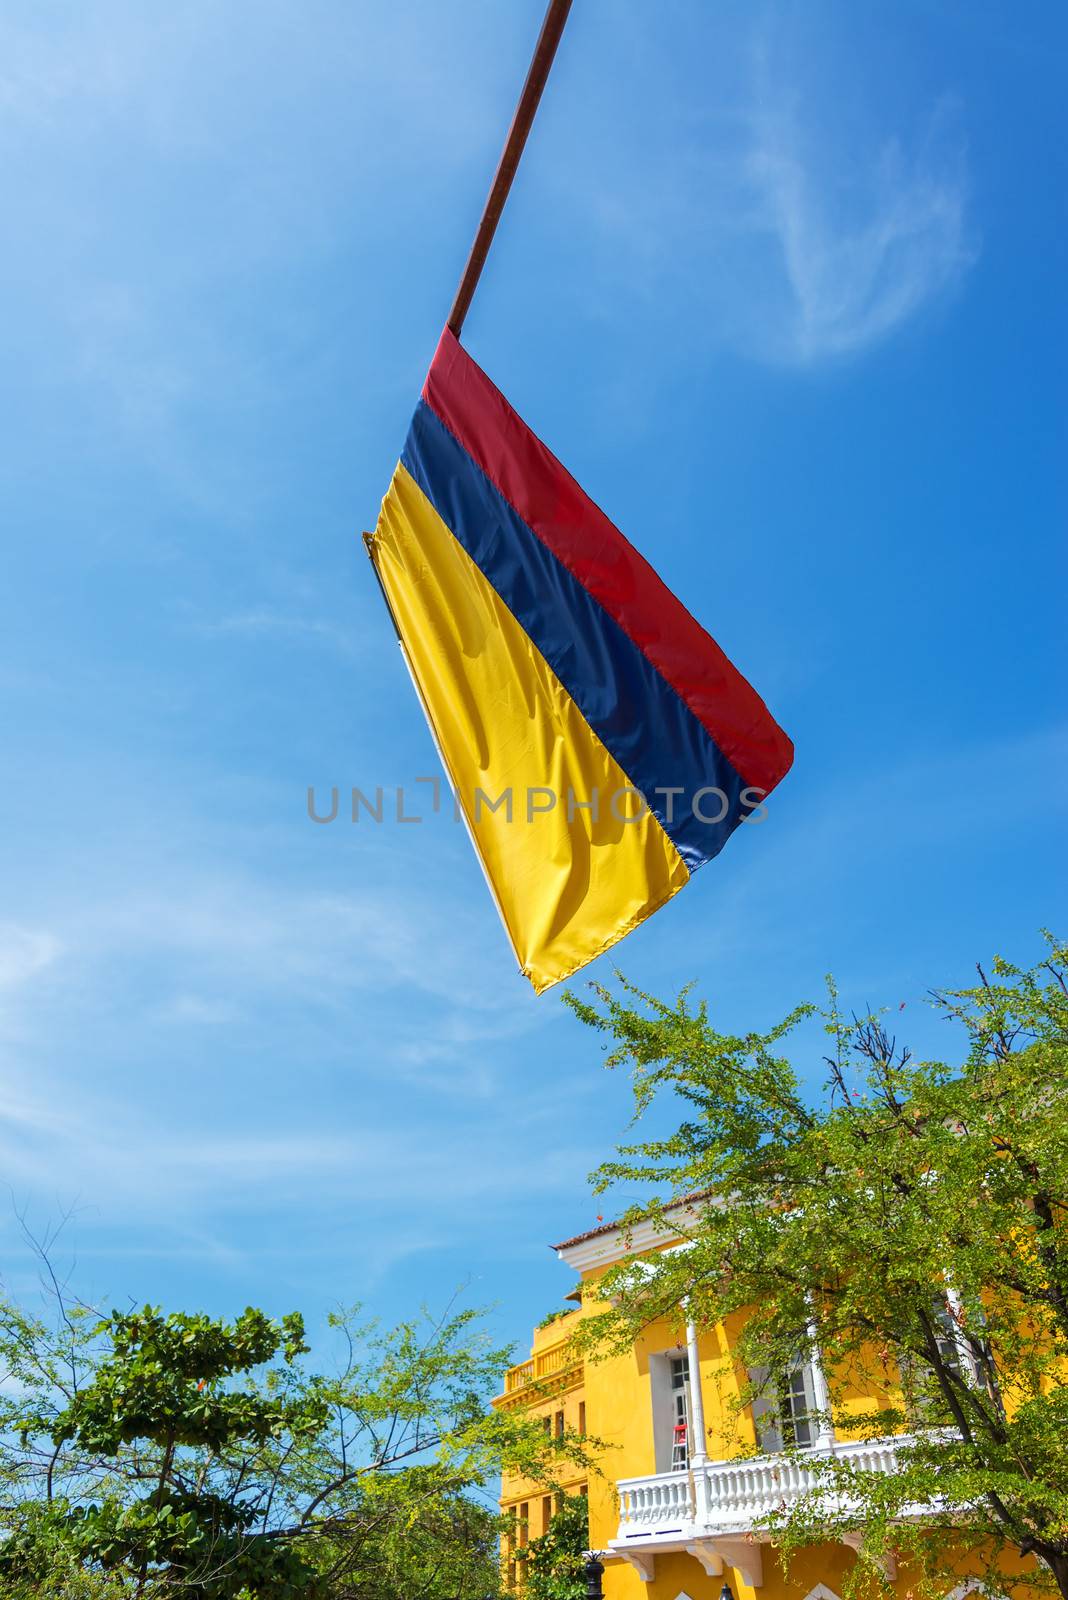 Colombian flag in the old town of Cartagena, Colombia with blue sky and colonial architecture